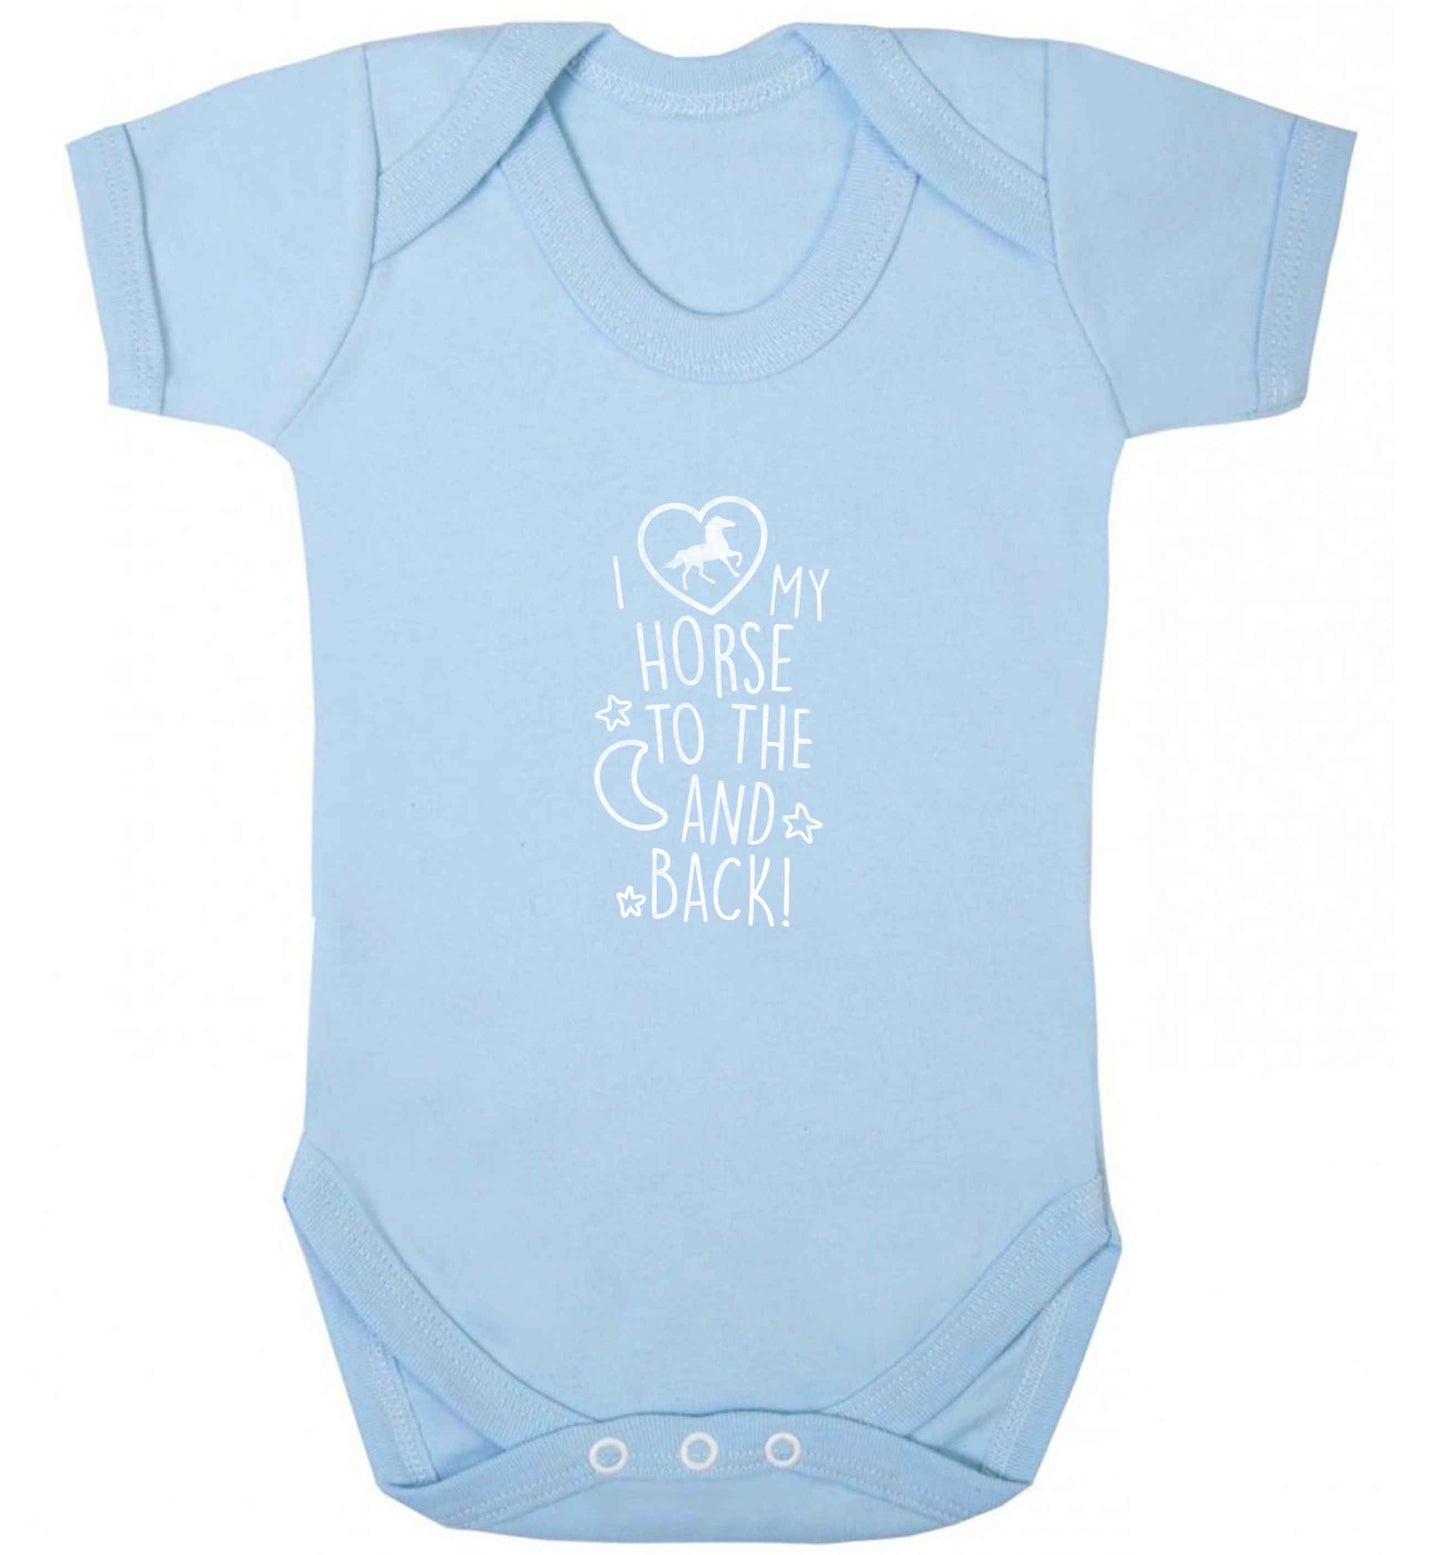 I love my horse to the moon and back baby vest pale blue 18-24 months